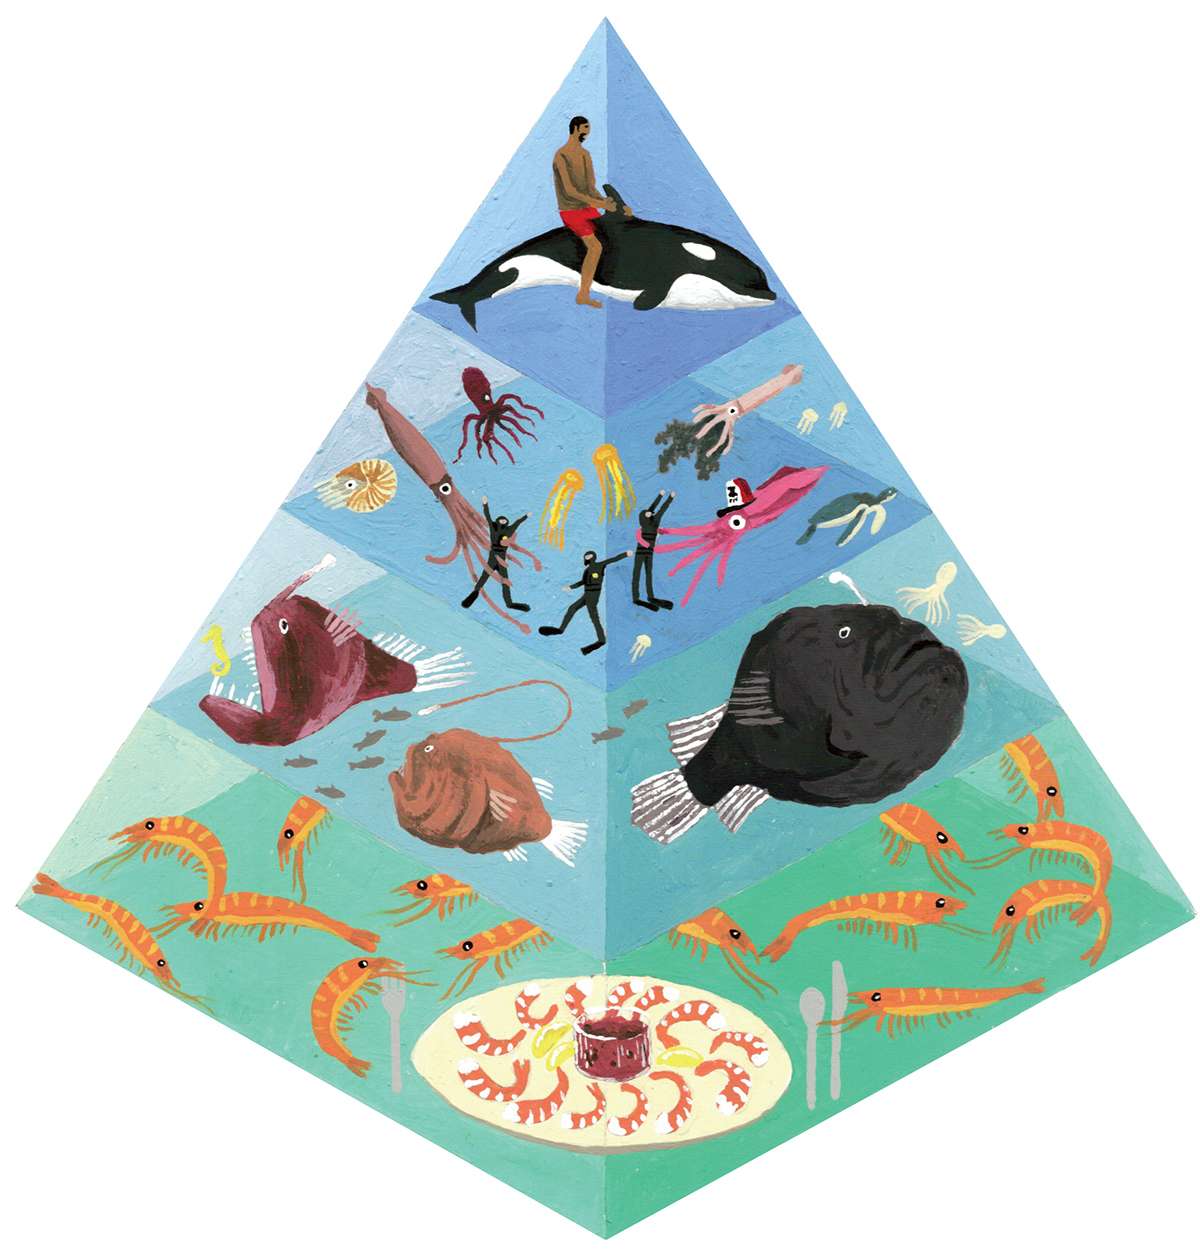 animals pyramids color science Bats fish Insects